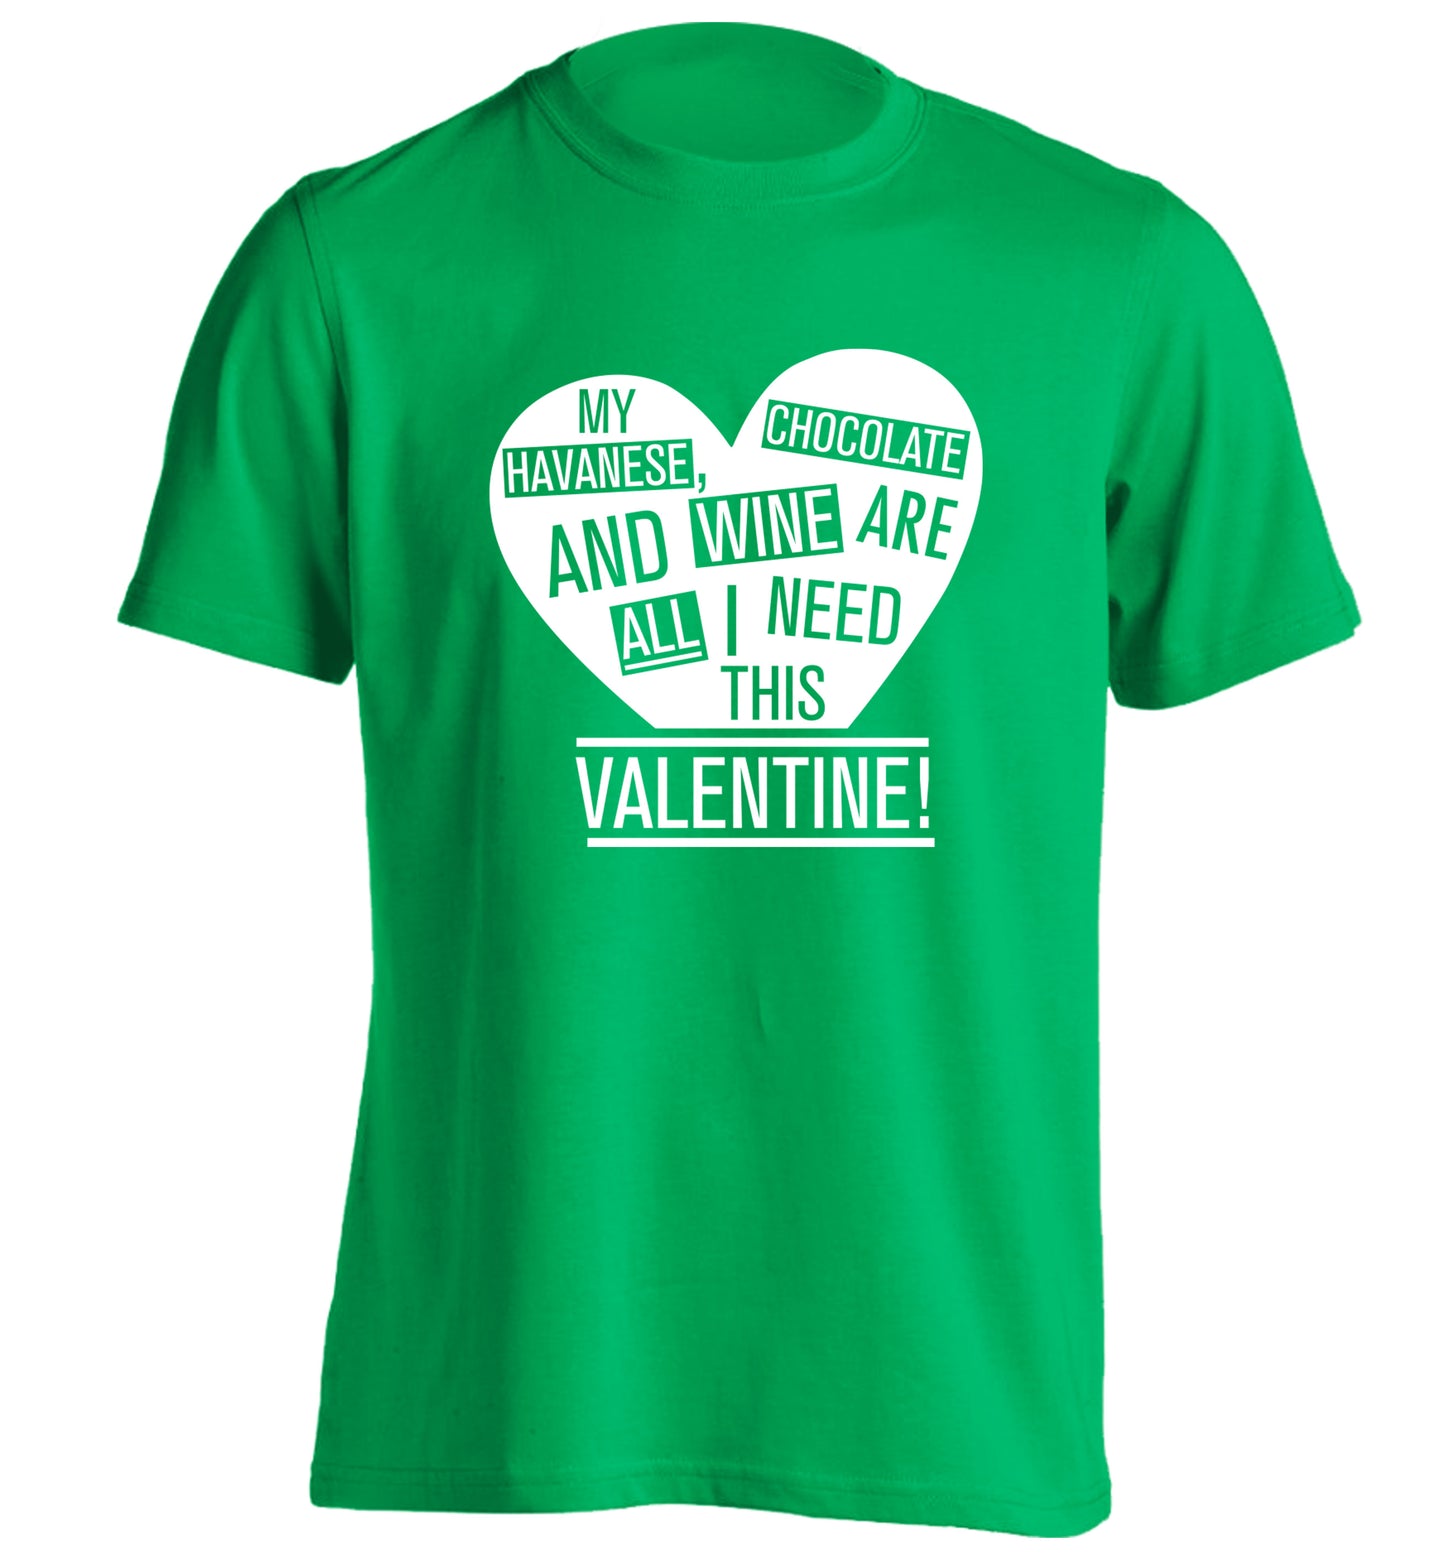 My havanese, chocolate and wine are all I need this valentine! adults unisex green Tshirt 2XL